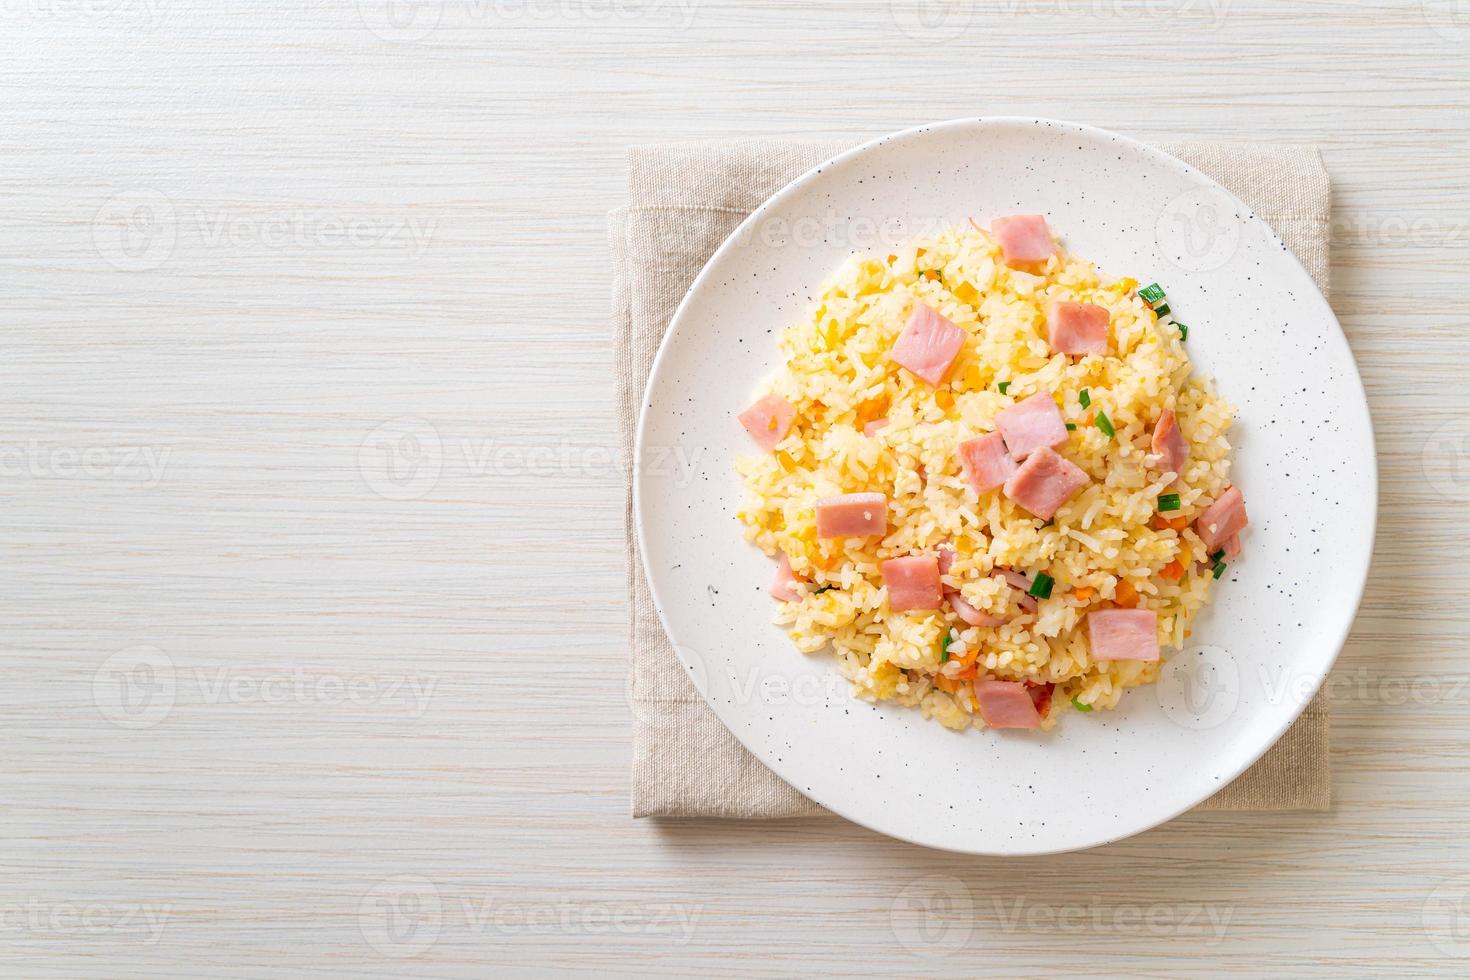 Homemnade fried rice with ham on plate photo